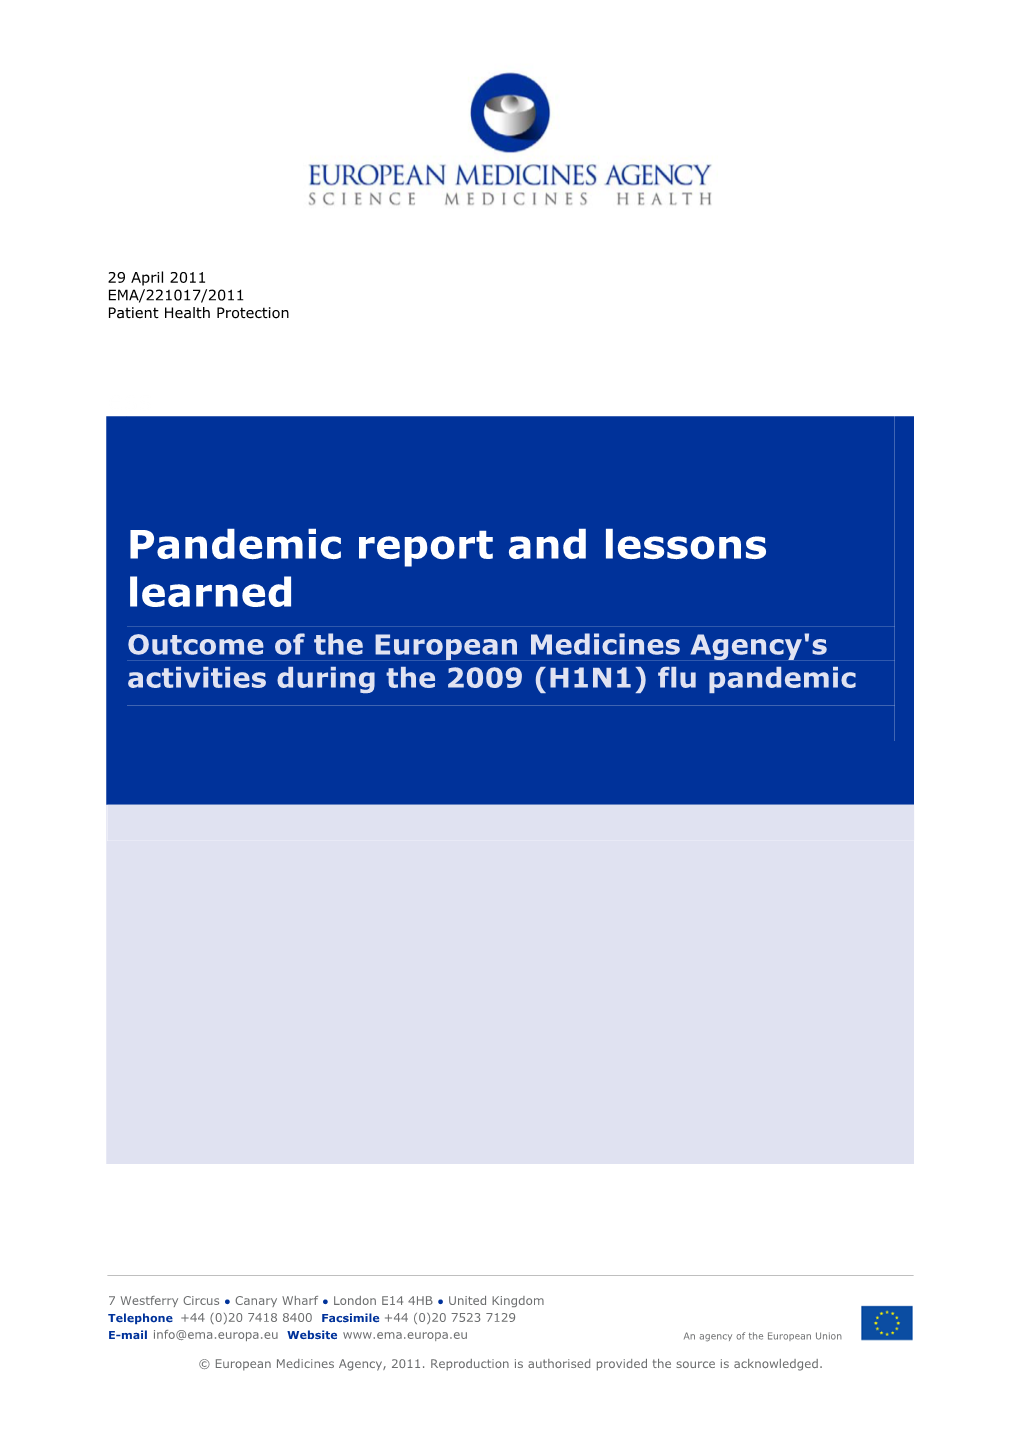 Pandemic Report and Lessons Learned Outcome of the European Medicines Agency's Activities During the 2009 (H1N1) Flu Pandemic